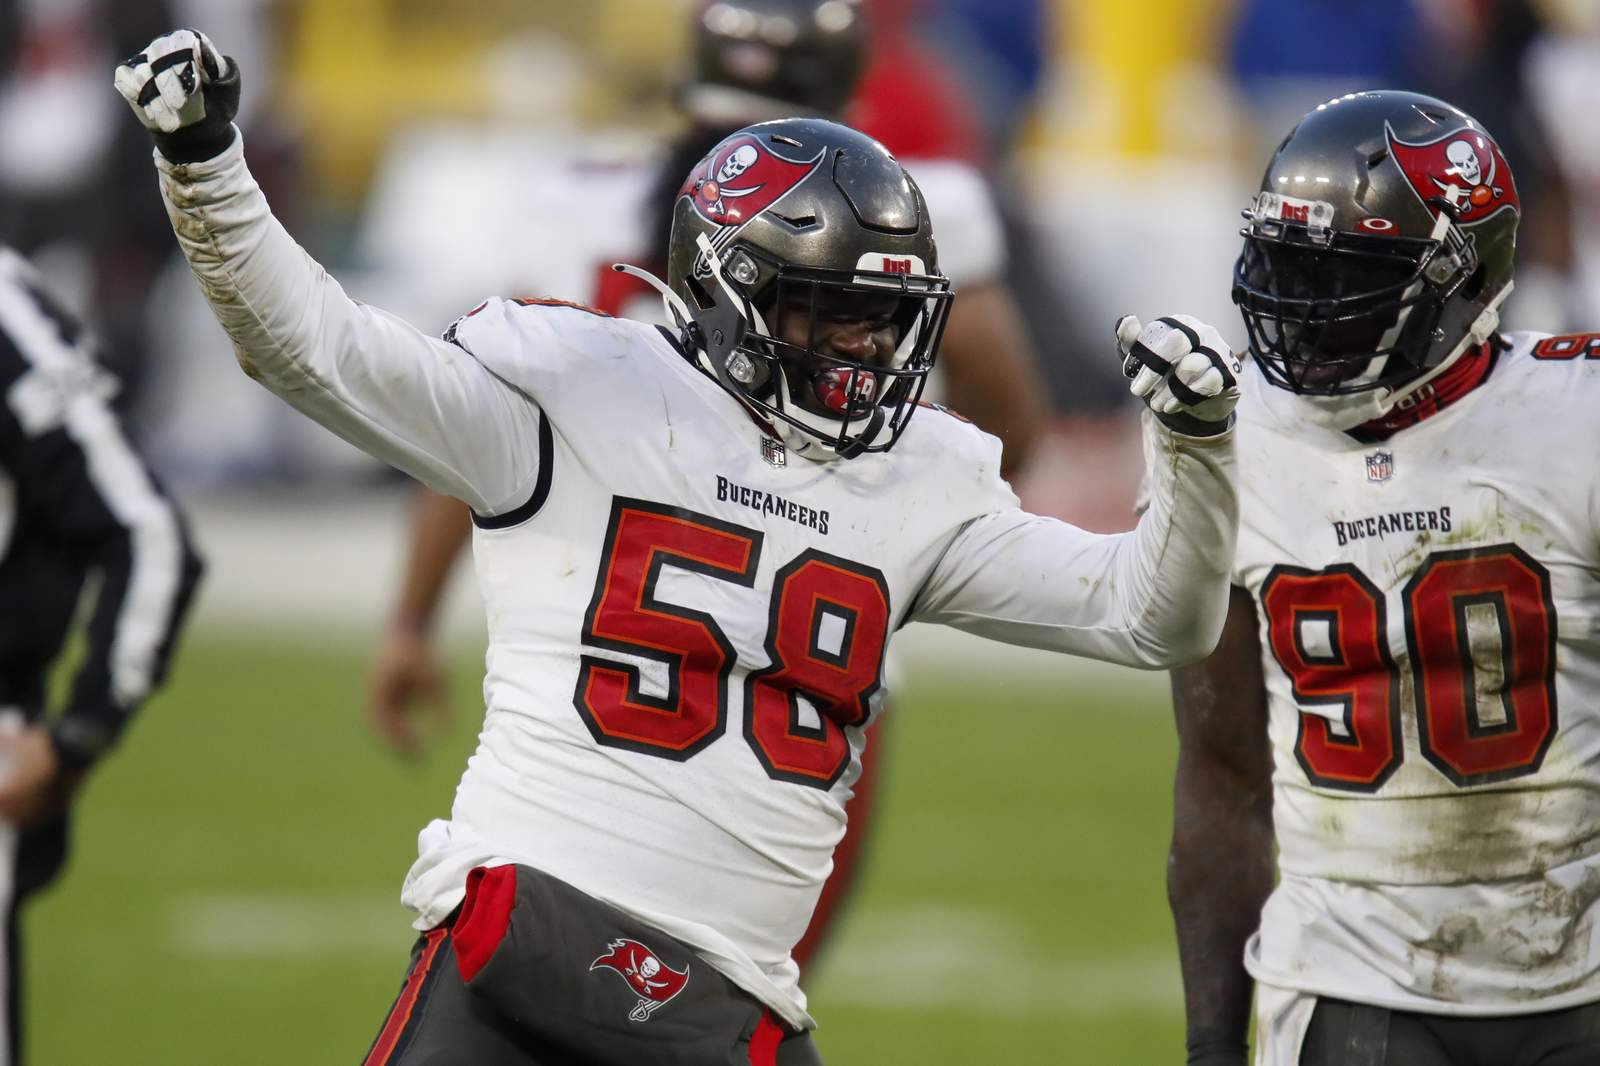 JPP, Barrett pace stingy Buccaneers defense against Rodgers